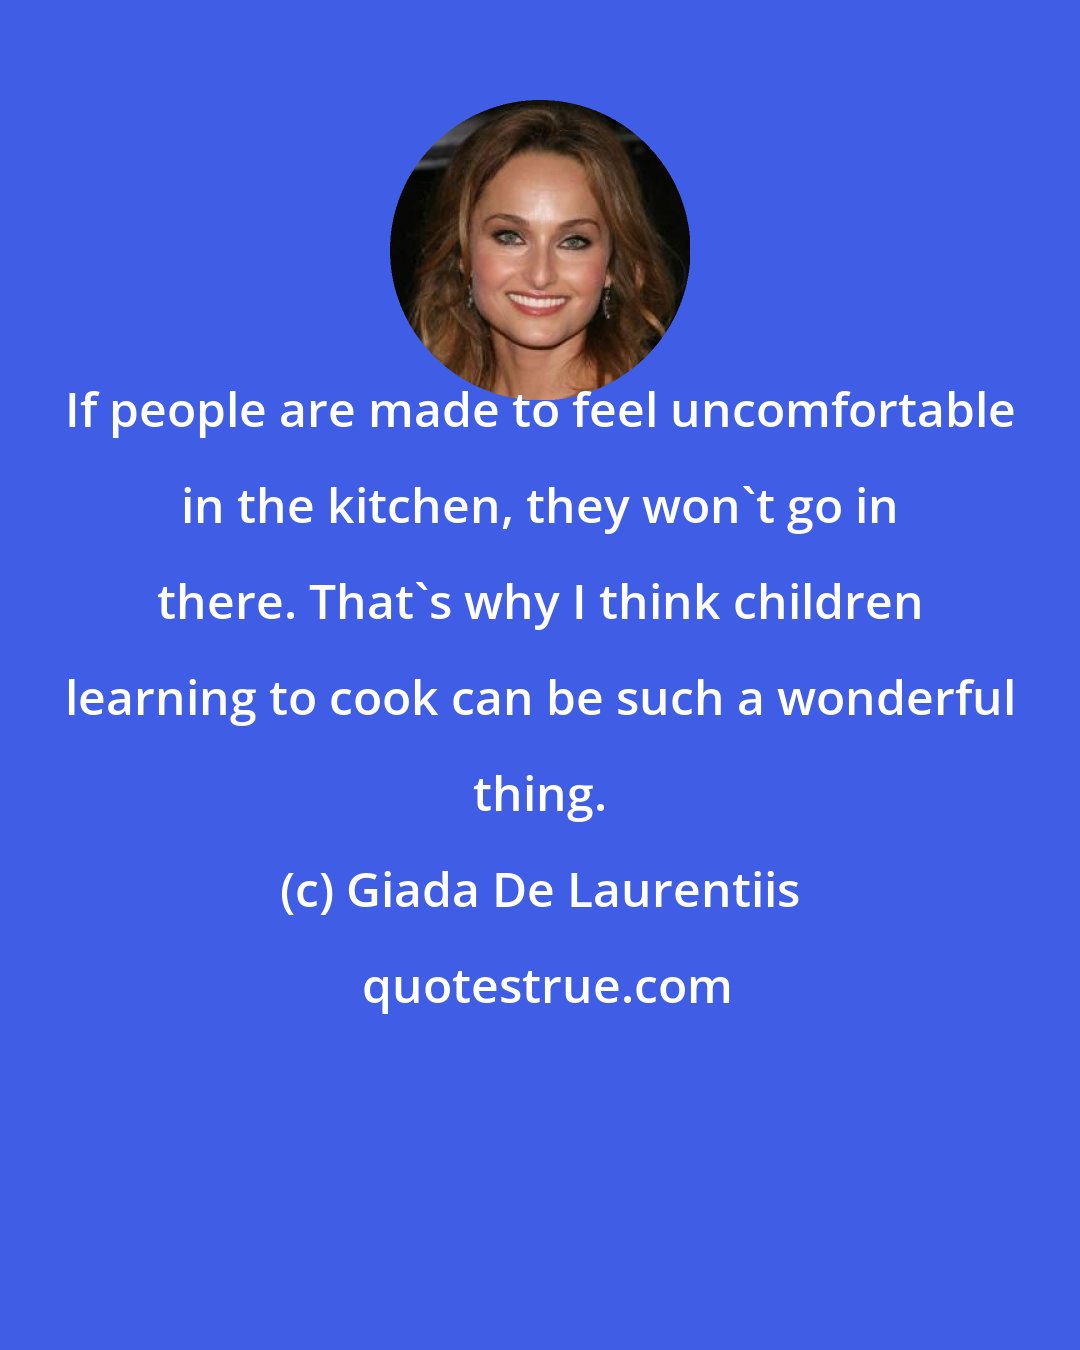 Giada De Laurentiis: If people are made to feel uncomfortable in the kitchen, they won't go in there. That's why I think children learning to cook can be such a wonderful thing.